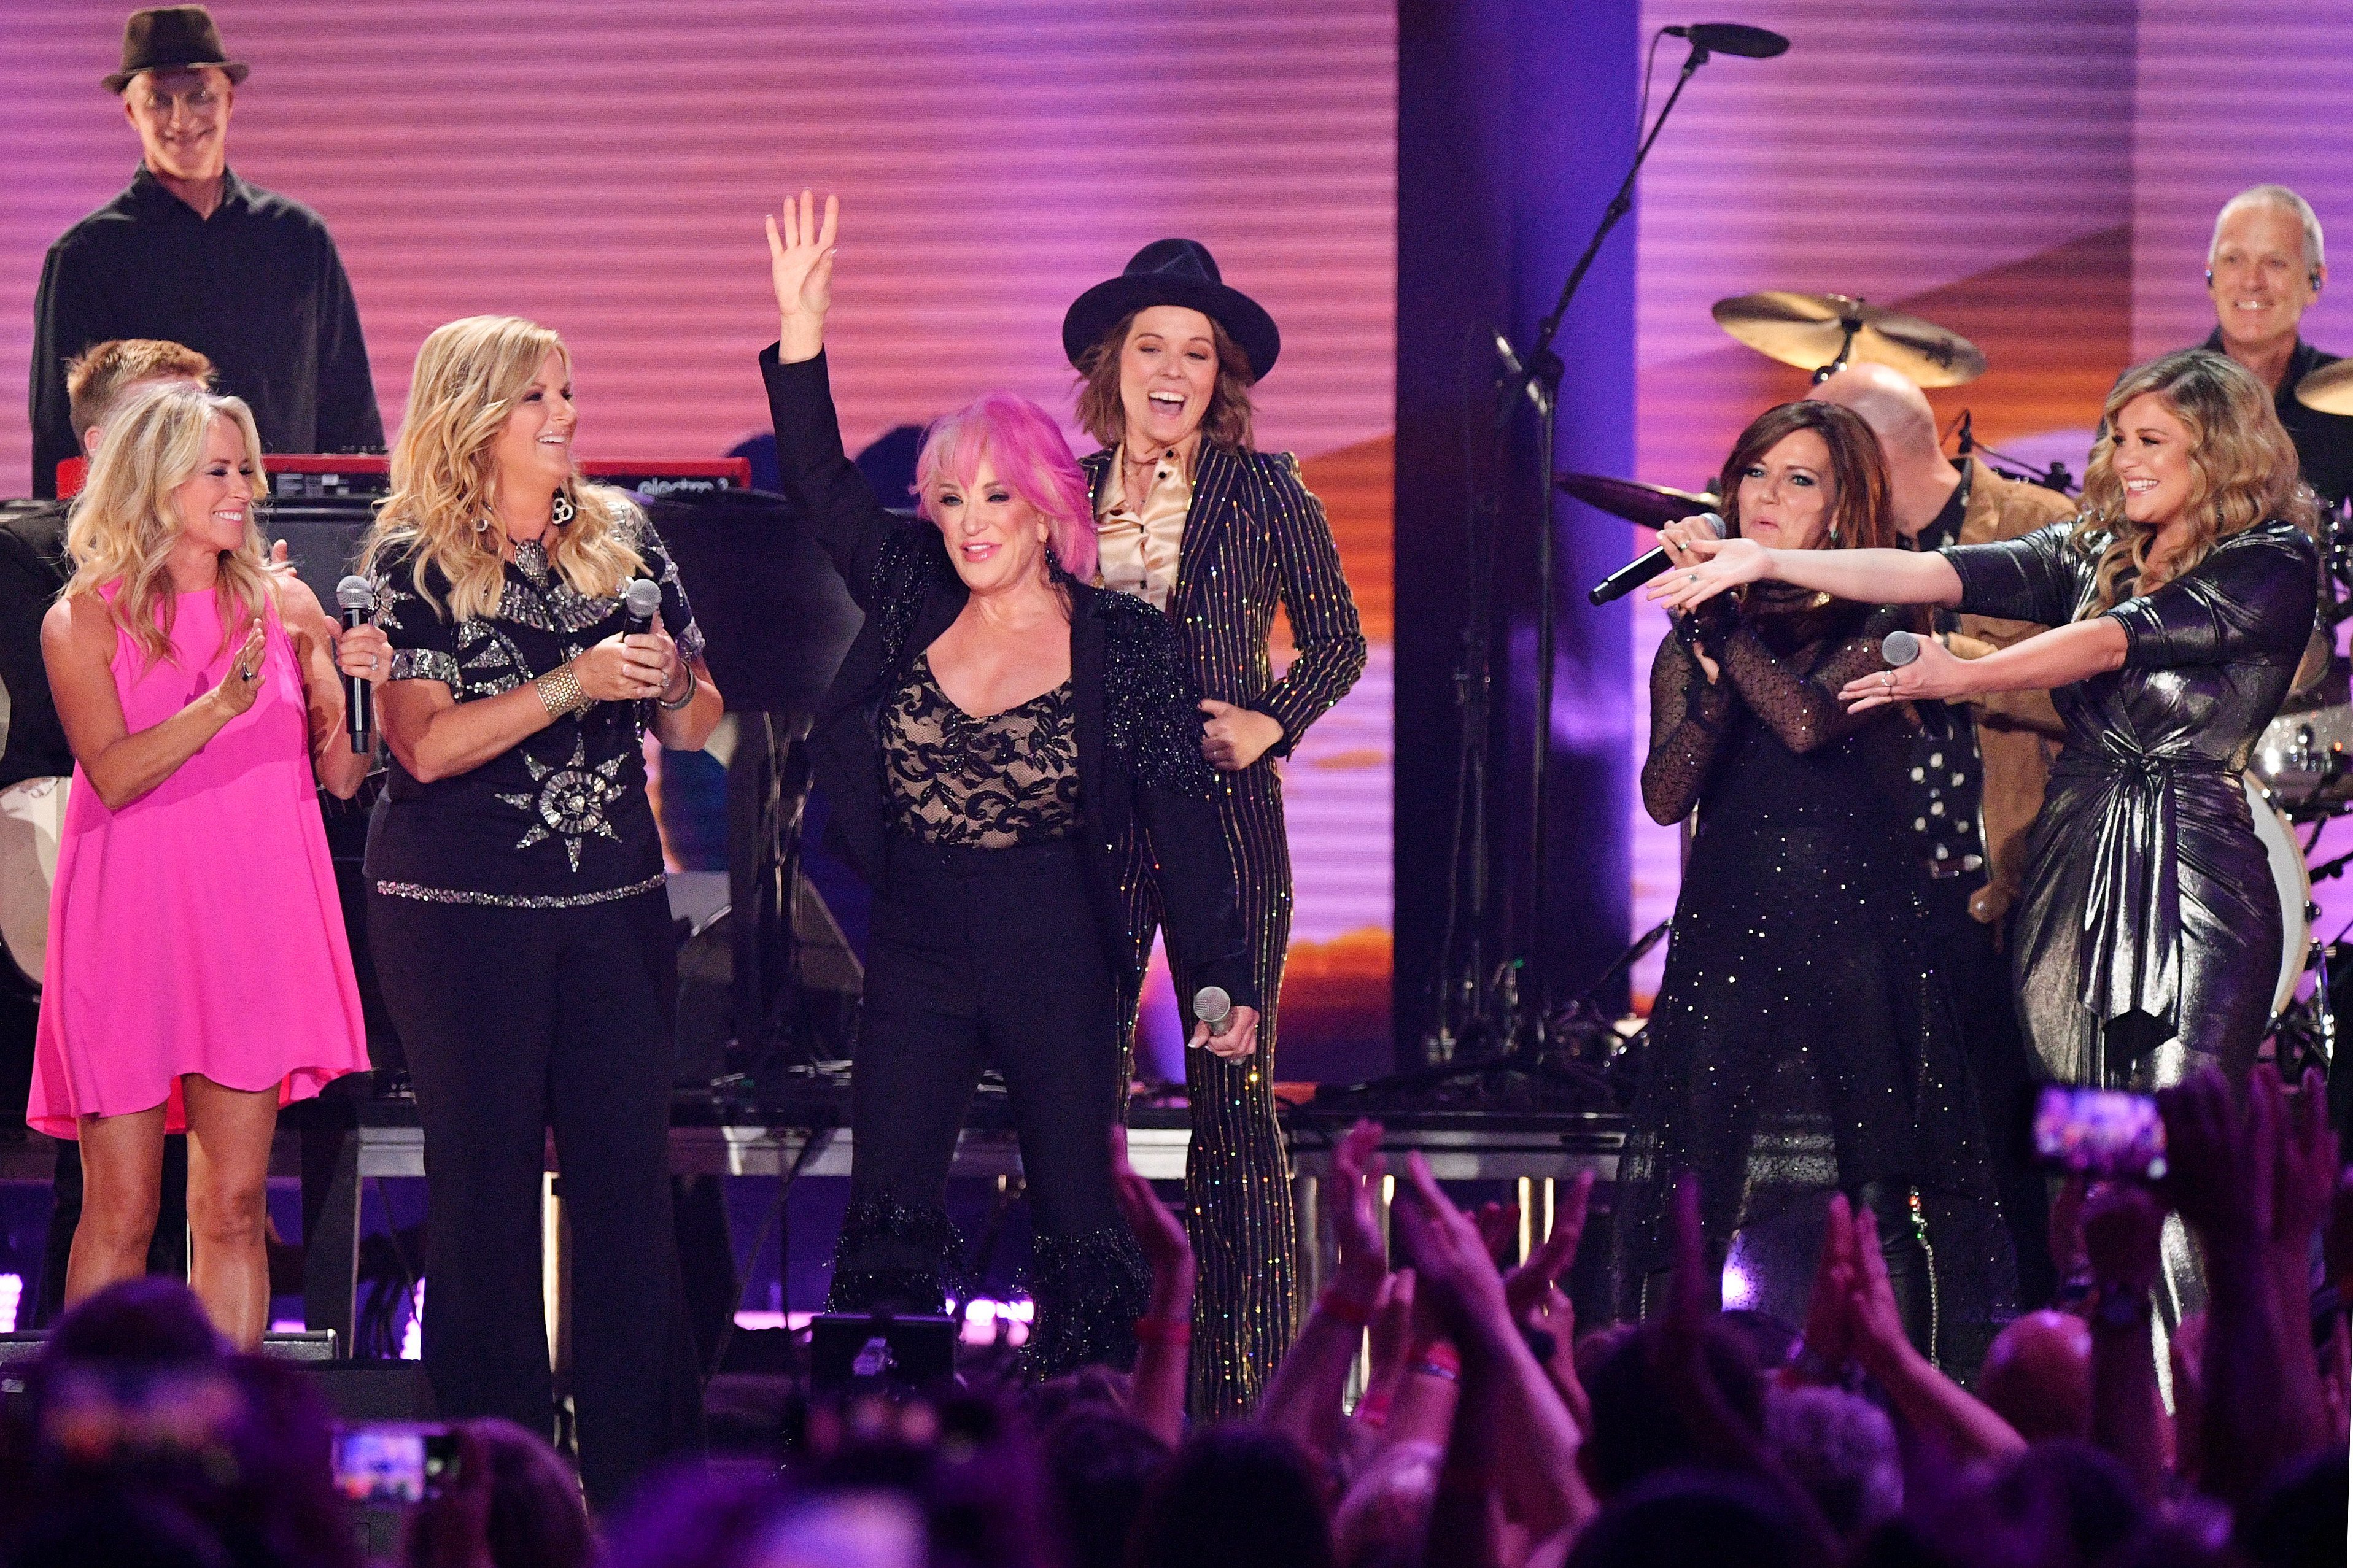 Tanya Tucker with Trisha Yearwood, Brandi Carlile, Martina McBride and Lauren Alaina at the 2019 CMT Music Awards in Nashville, Tennessee | Photo: Getty Images